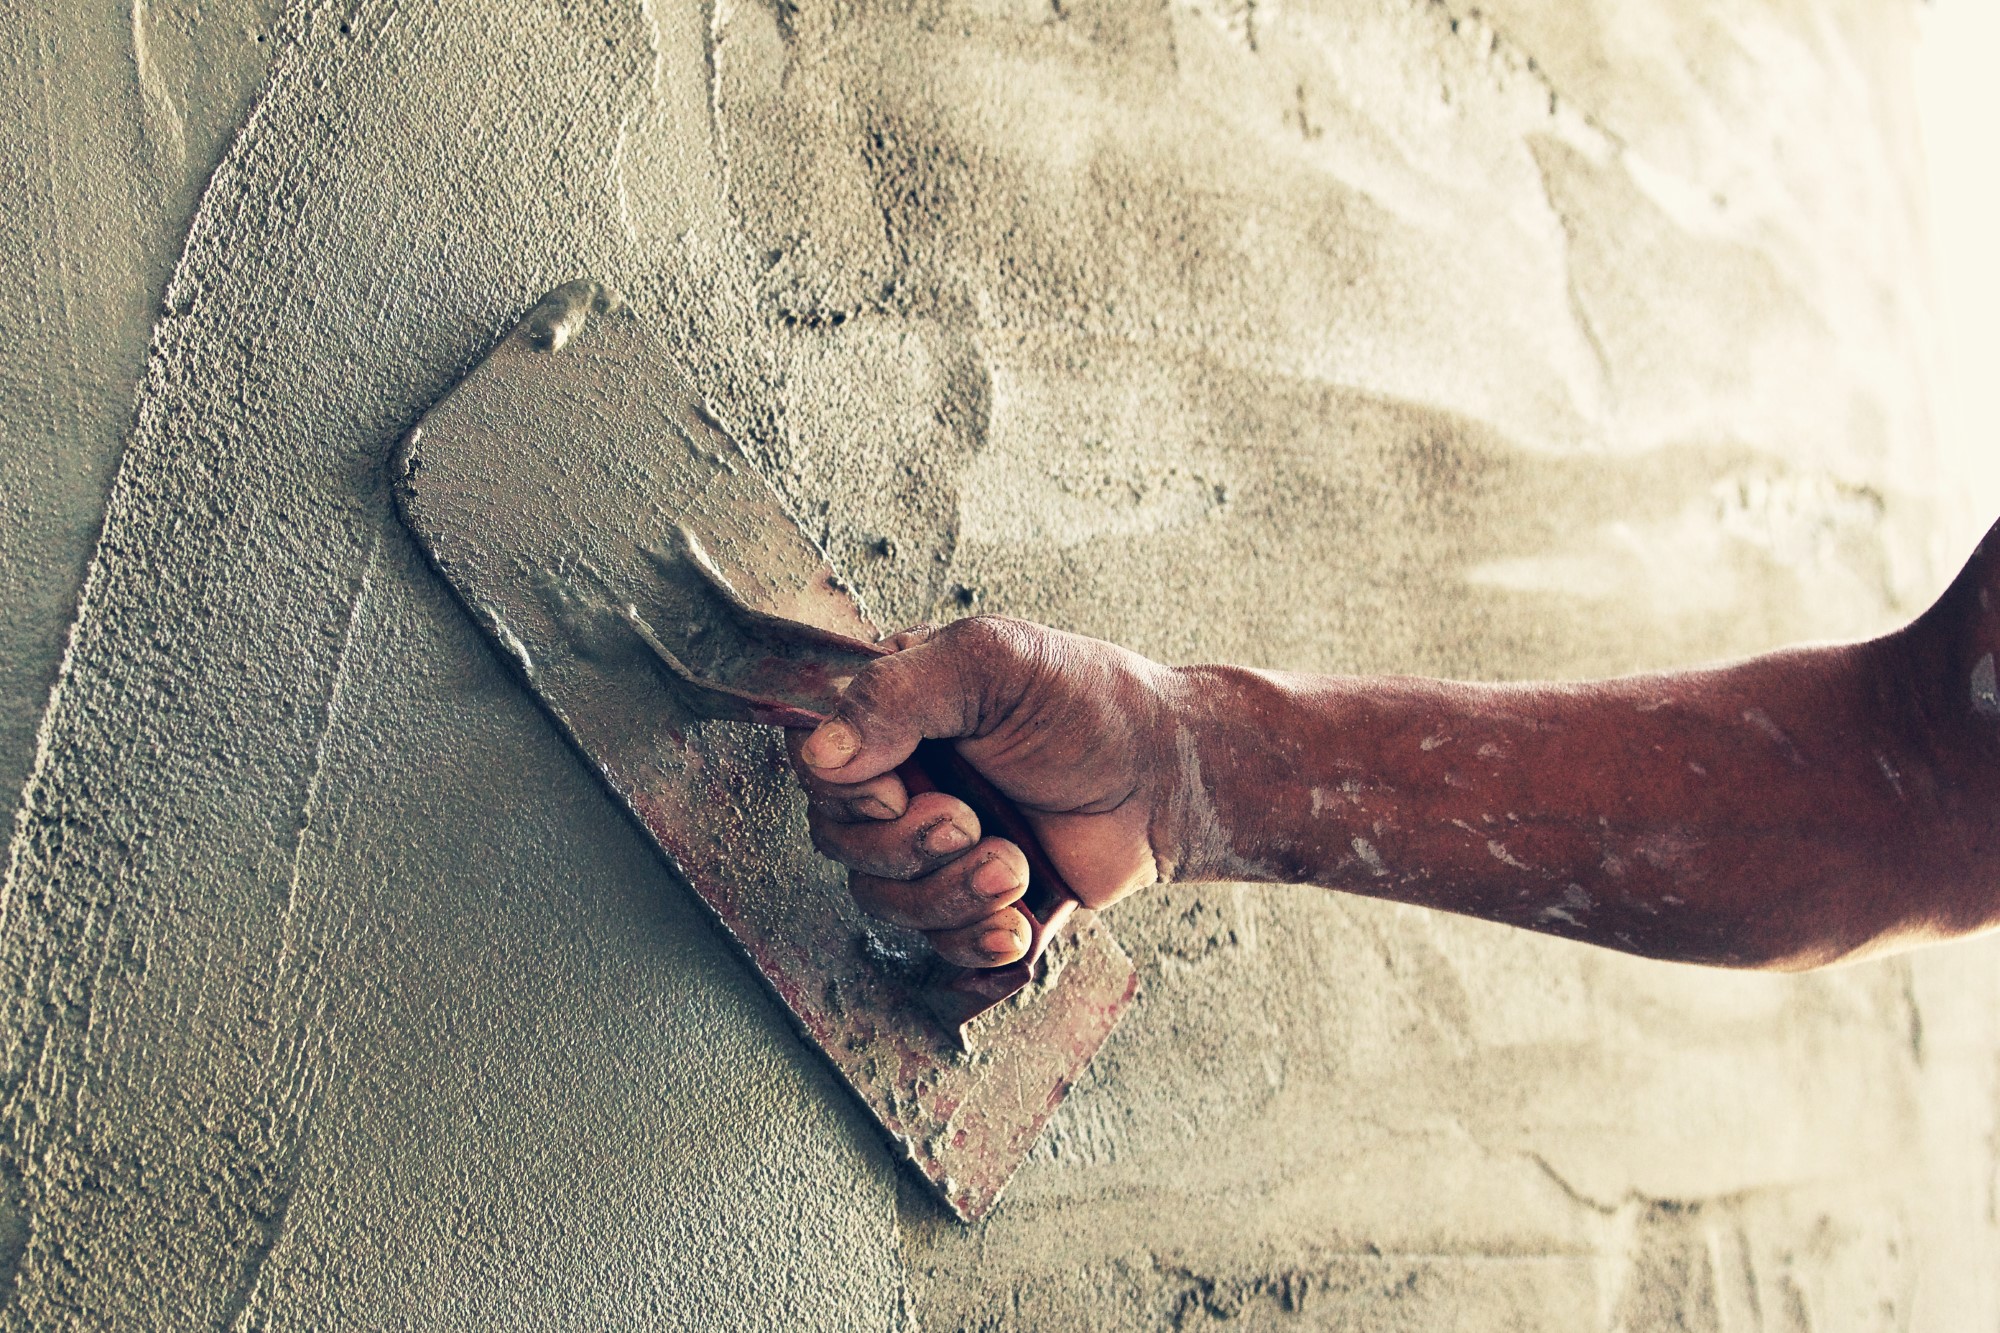 construction worker plastering cement on wall